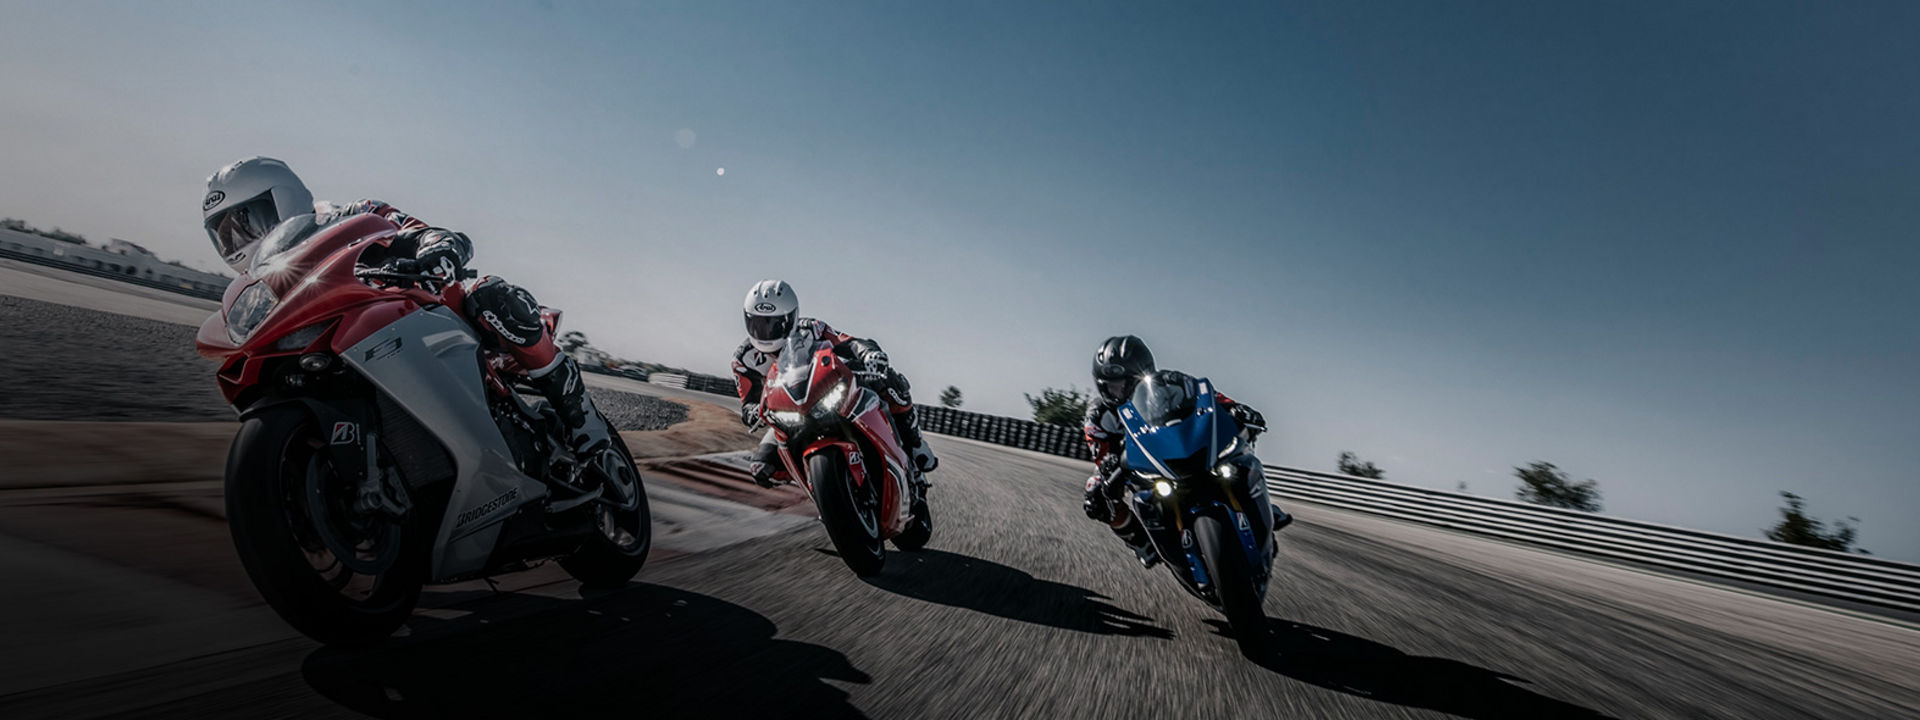 This image shows three motorcycle racers cornering with Bridgestone tyres on a race track at high speed. 